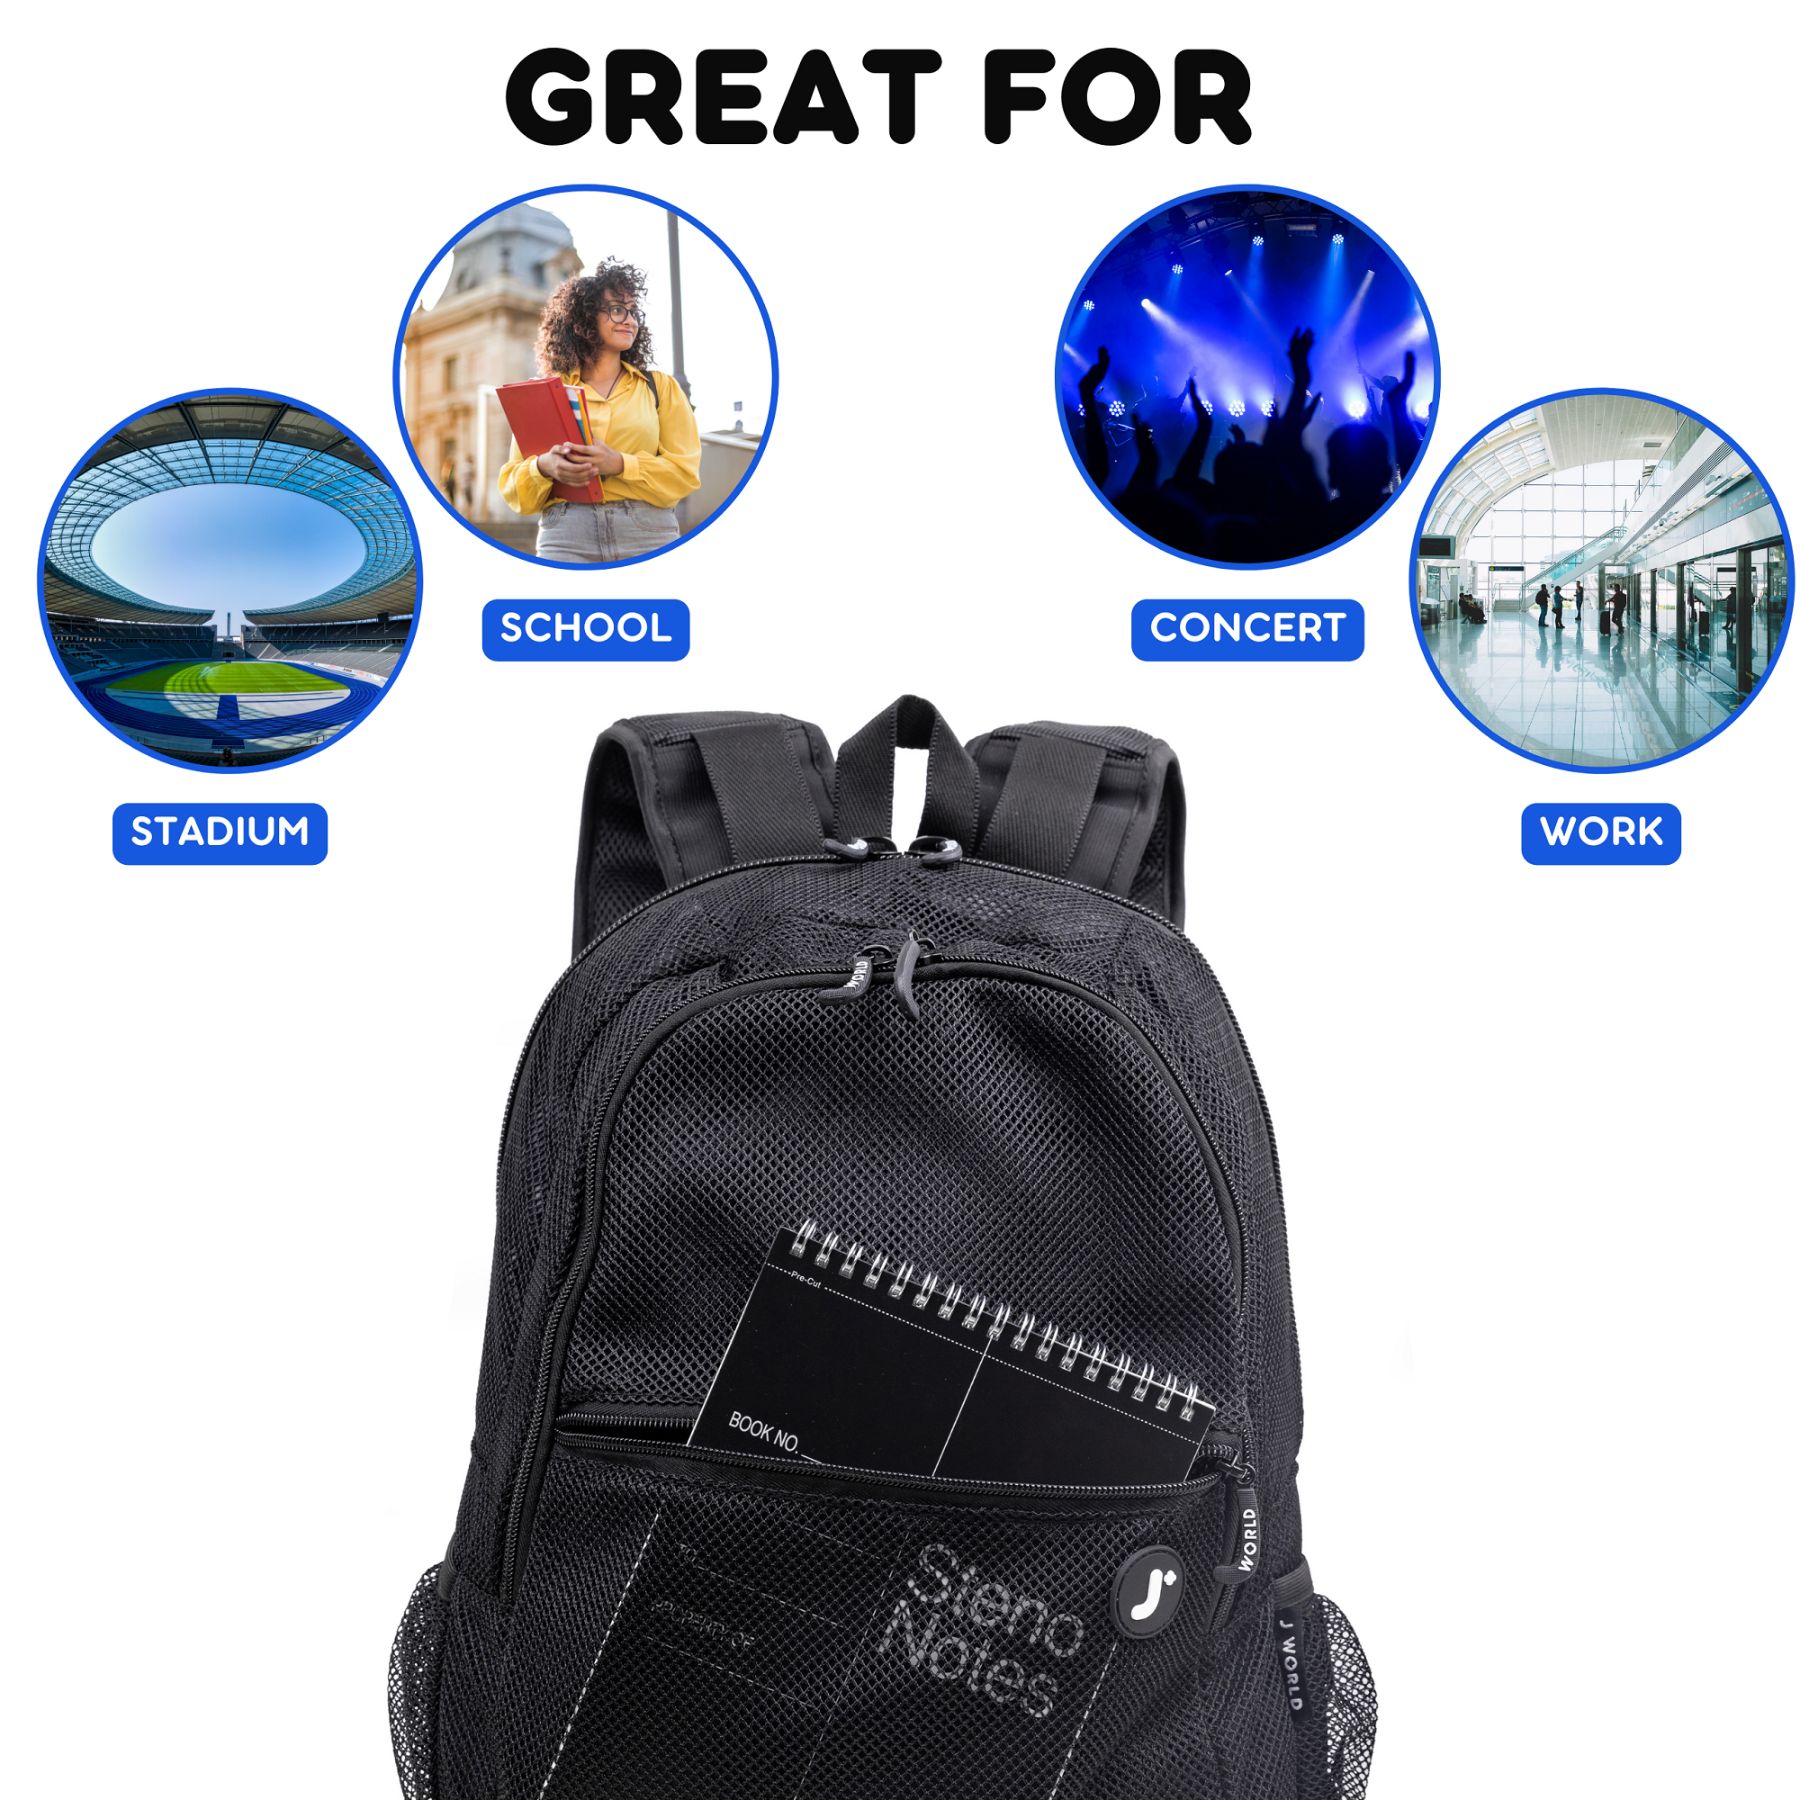 J World 18" Mesh Backpack for School and Travel, Black - image 4 of 7